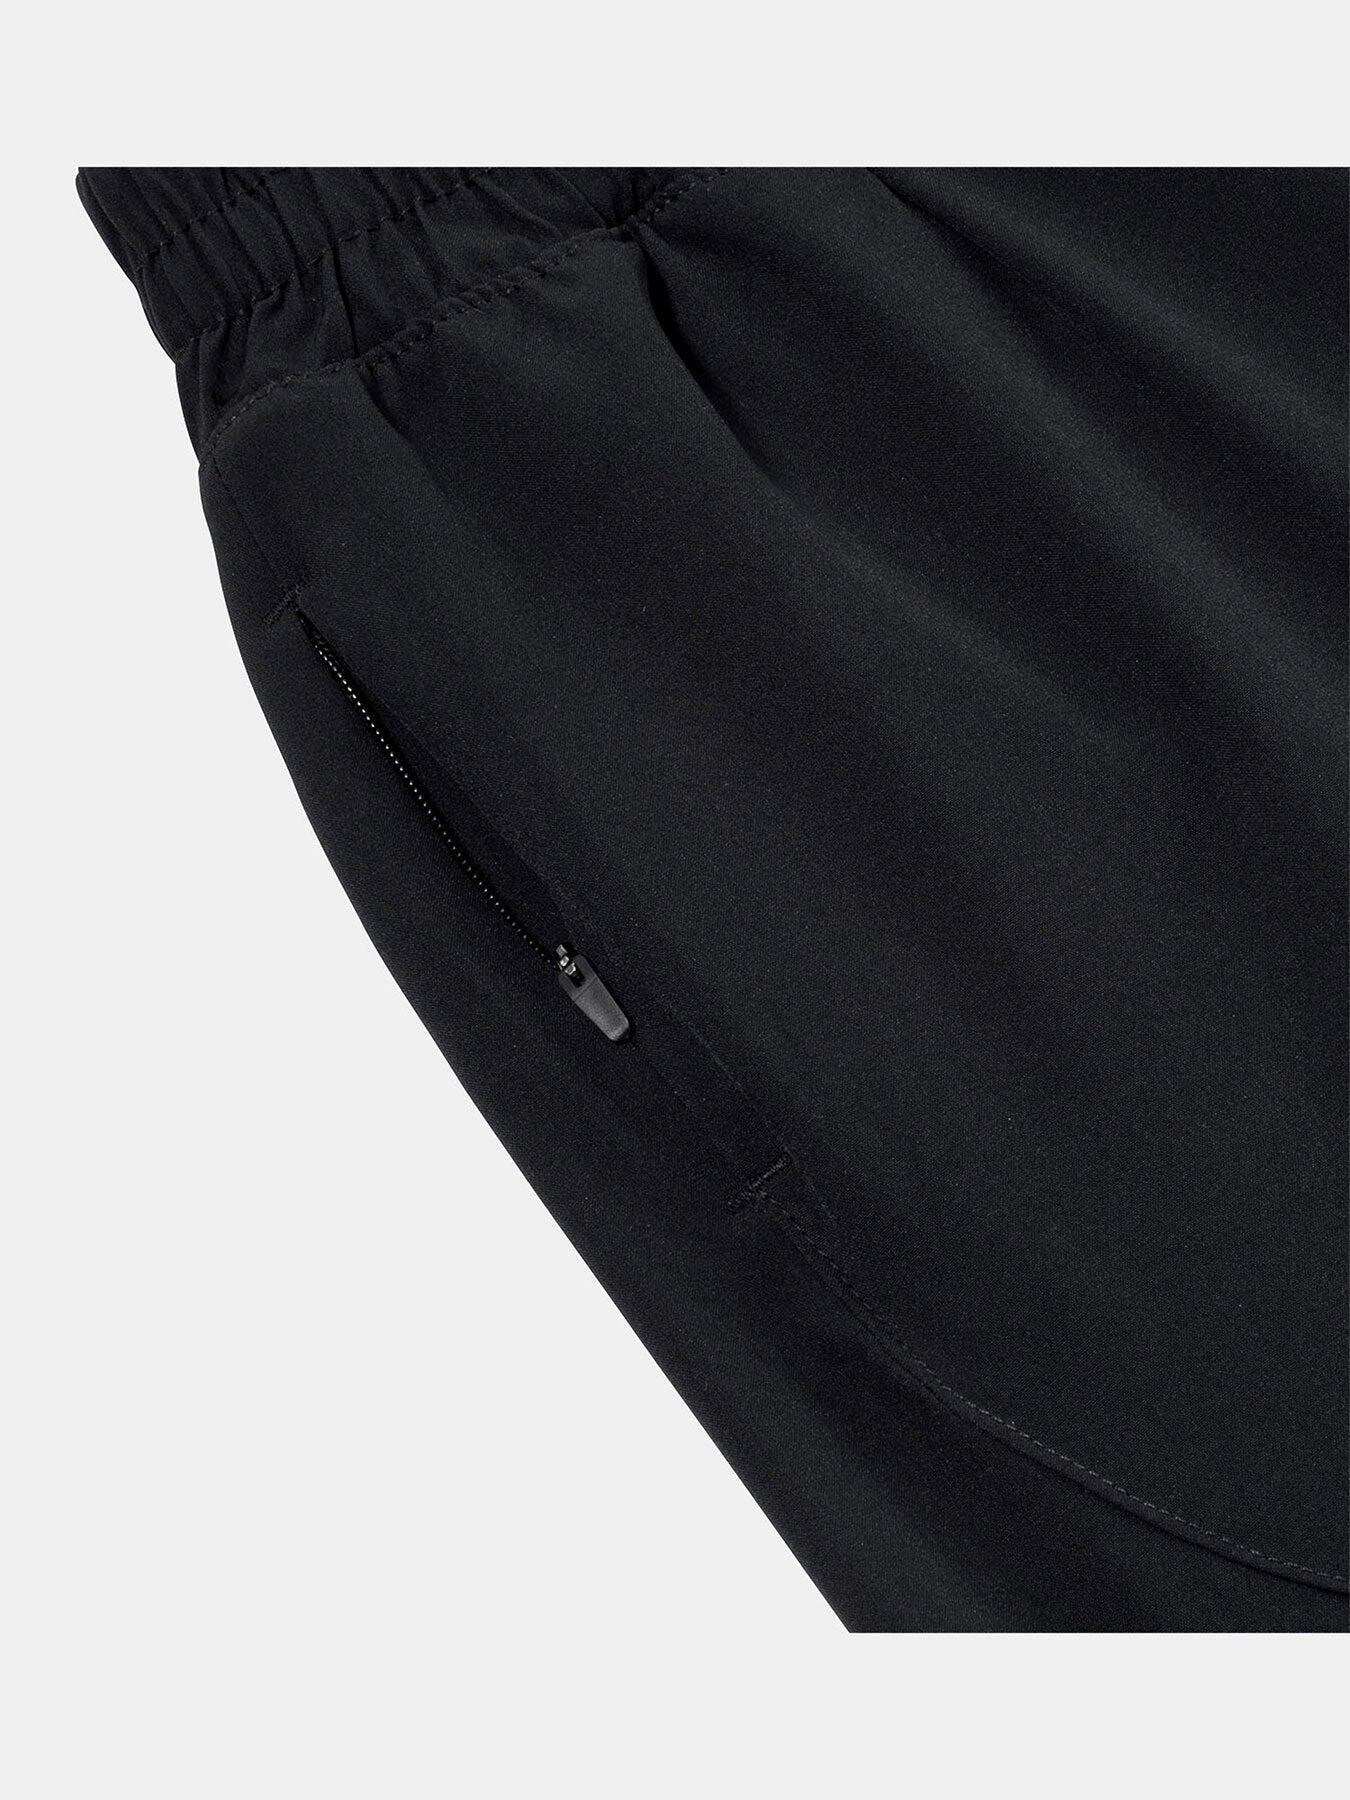 Women’s Perform 2-in-1 Shorts with Zip Pocket - Anthracite 5/5